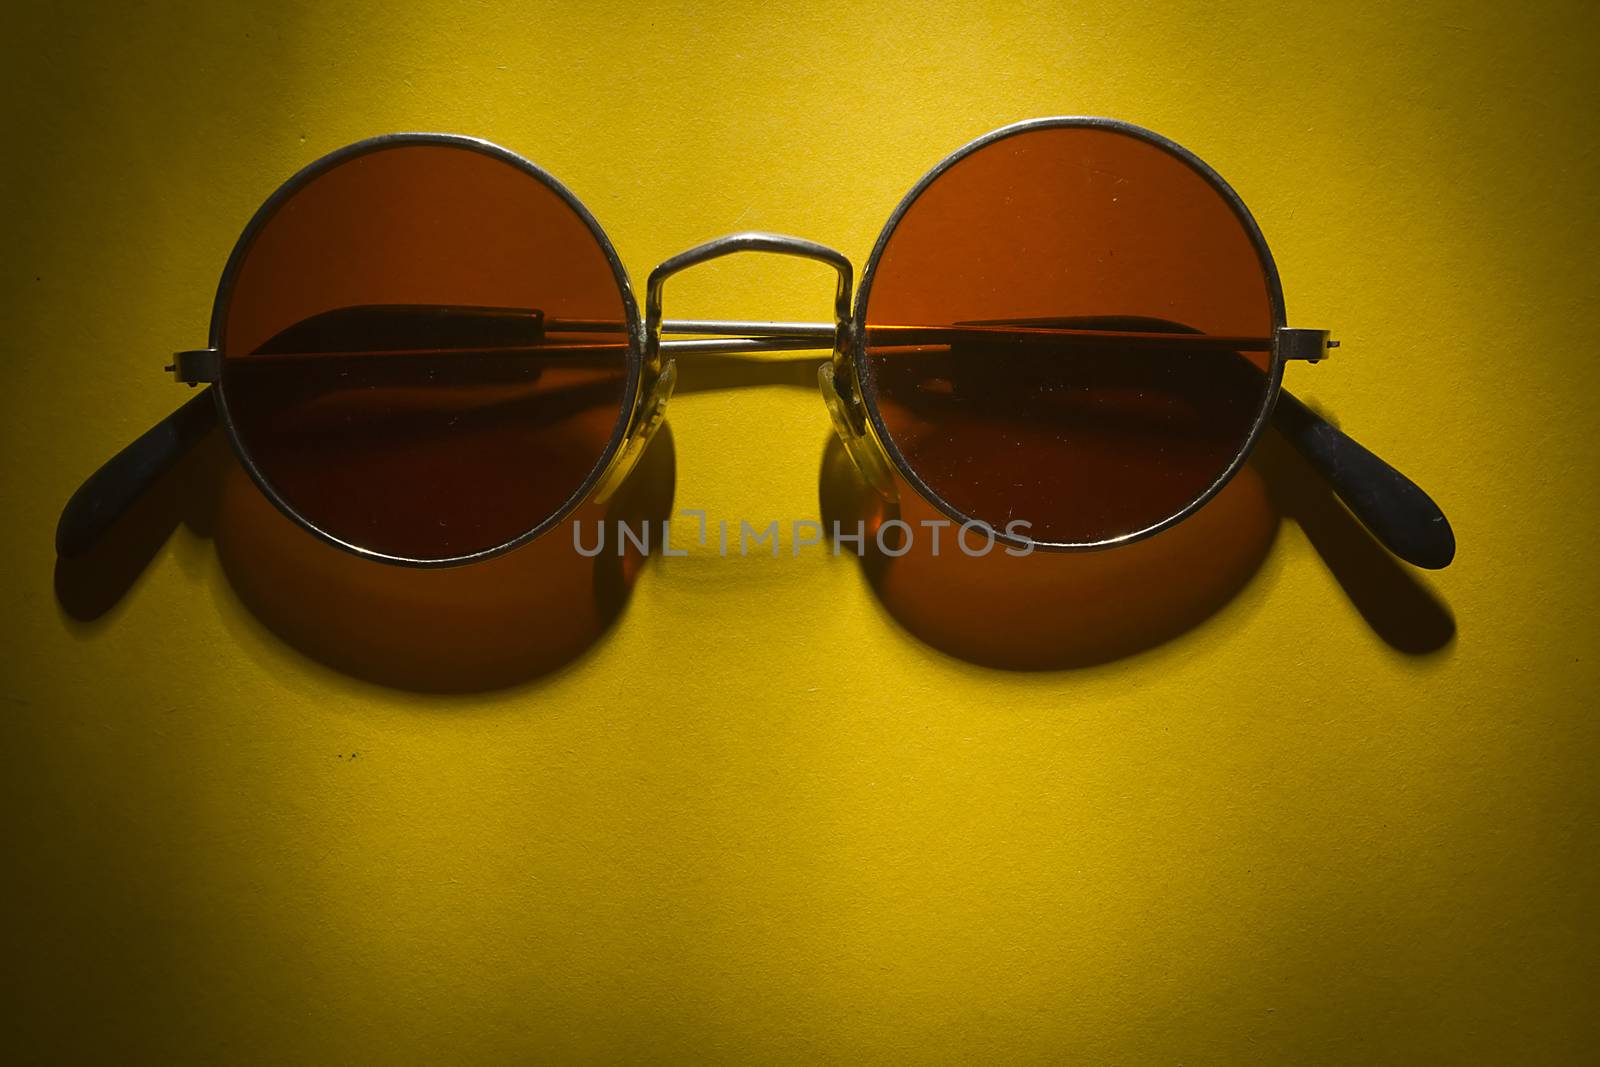 Round sunglasses on the table with yellow coating